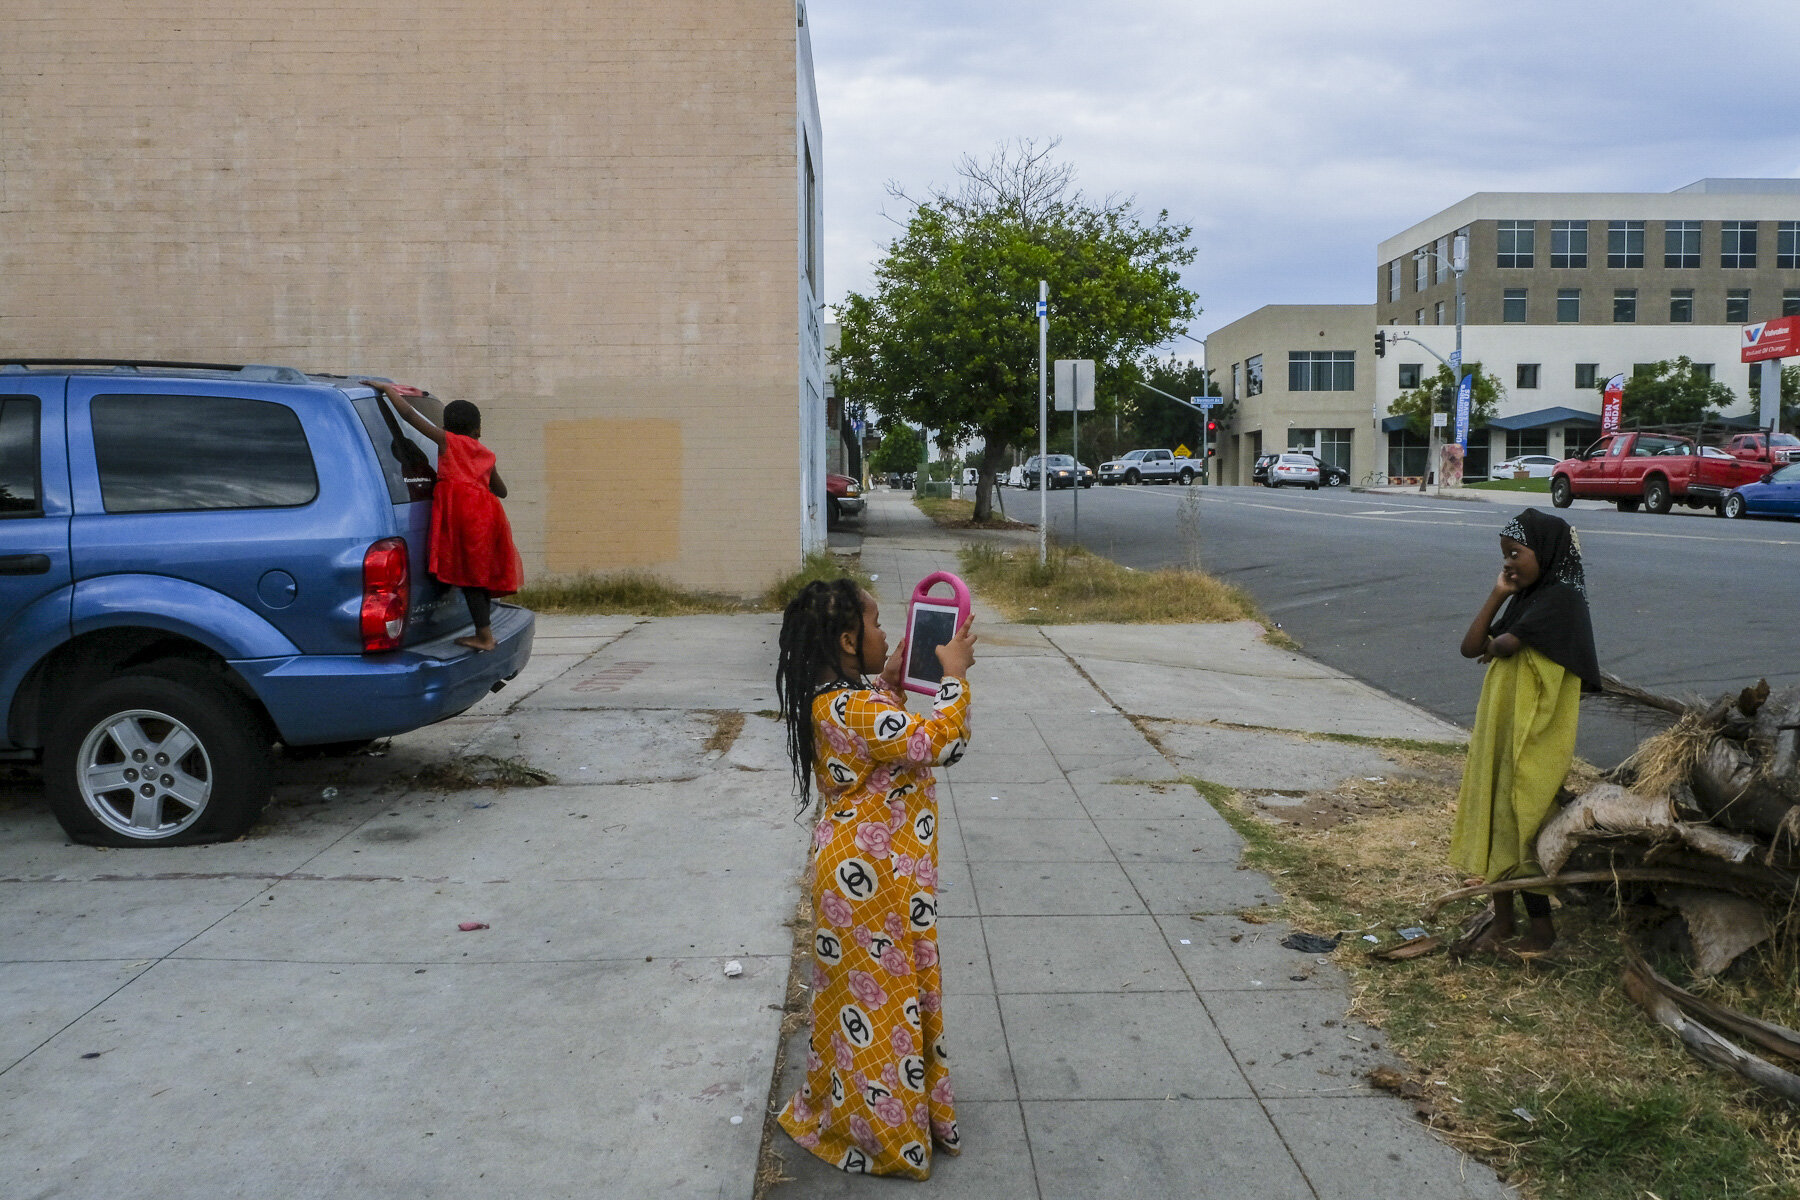  USA, San Diego, CA, November 5, 2020. Sadiya, 7, and her cousins Nuriya, 7, and Safiya, 5, take and pose for photographs after class. In the midst of her indigenous literature Zoom class, Musa notices the girls outside and quickly calls them back in